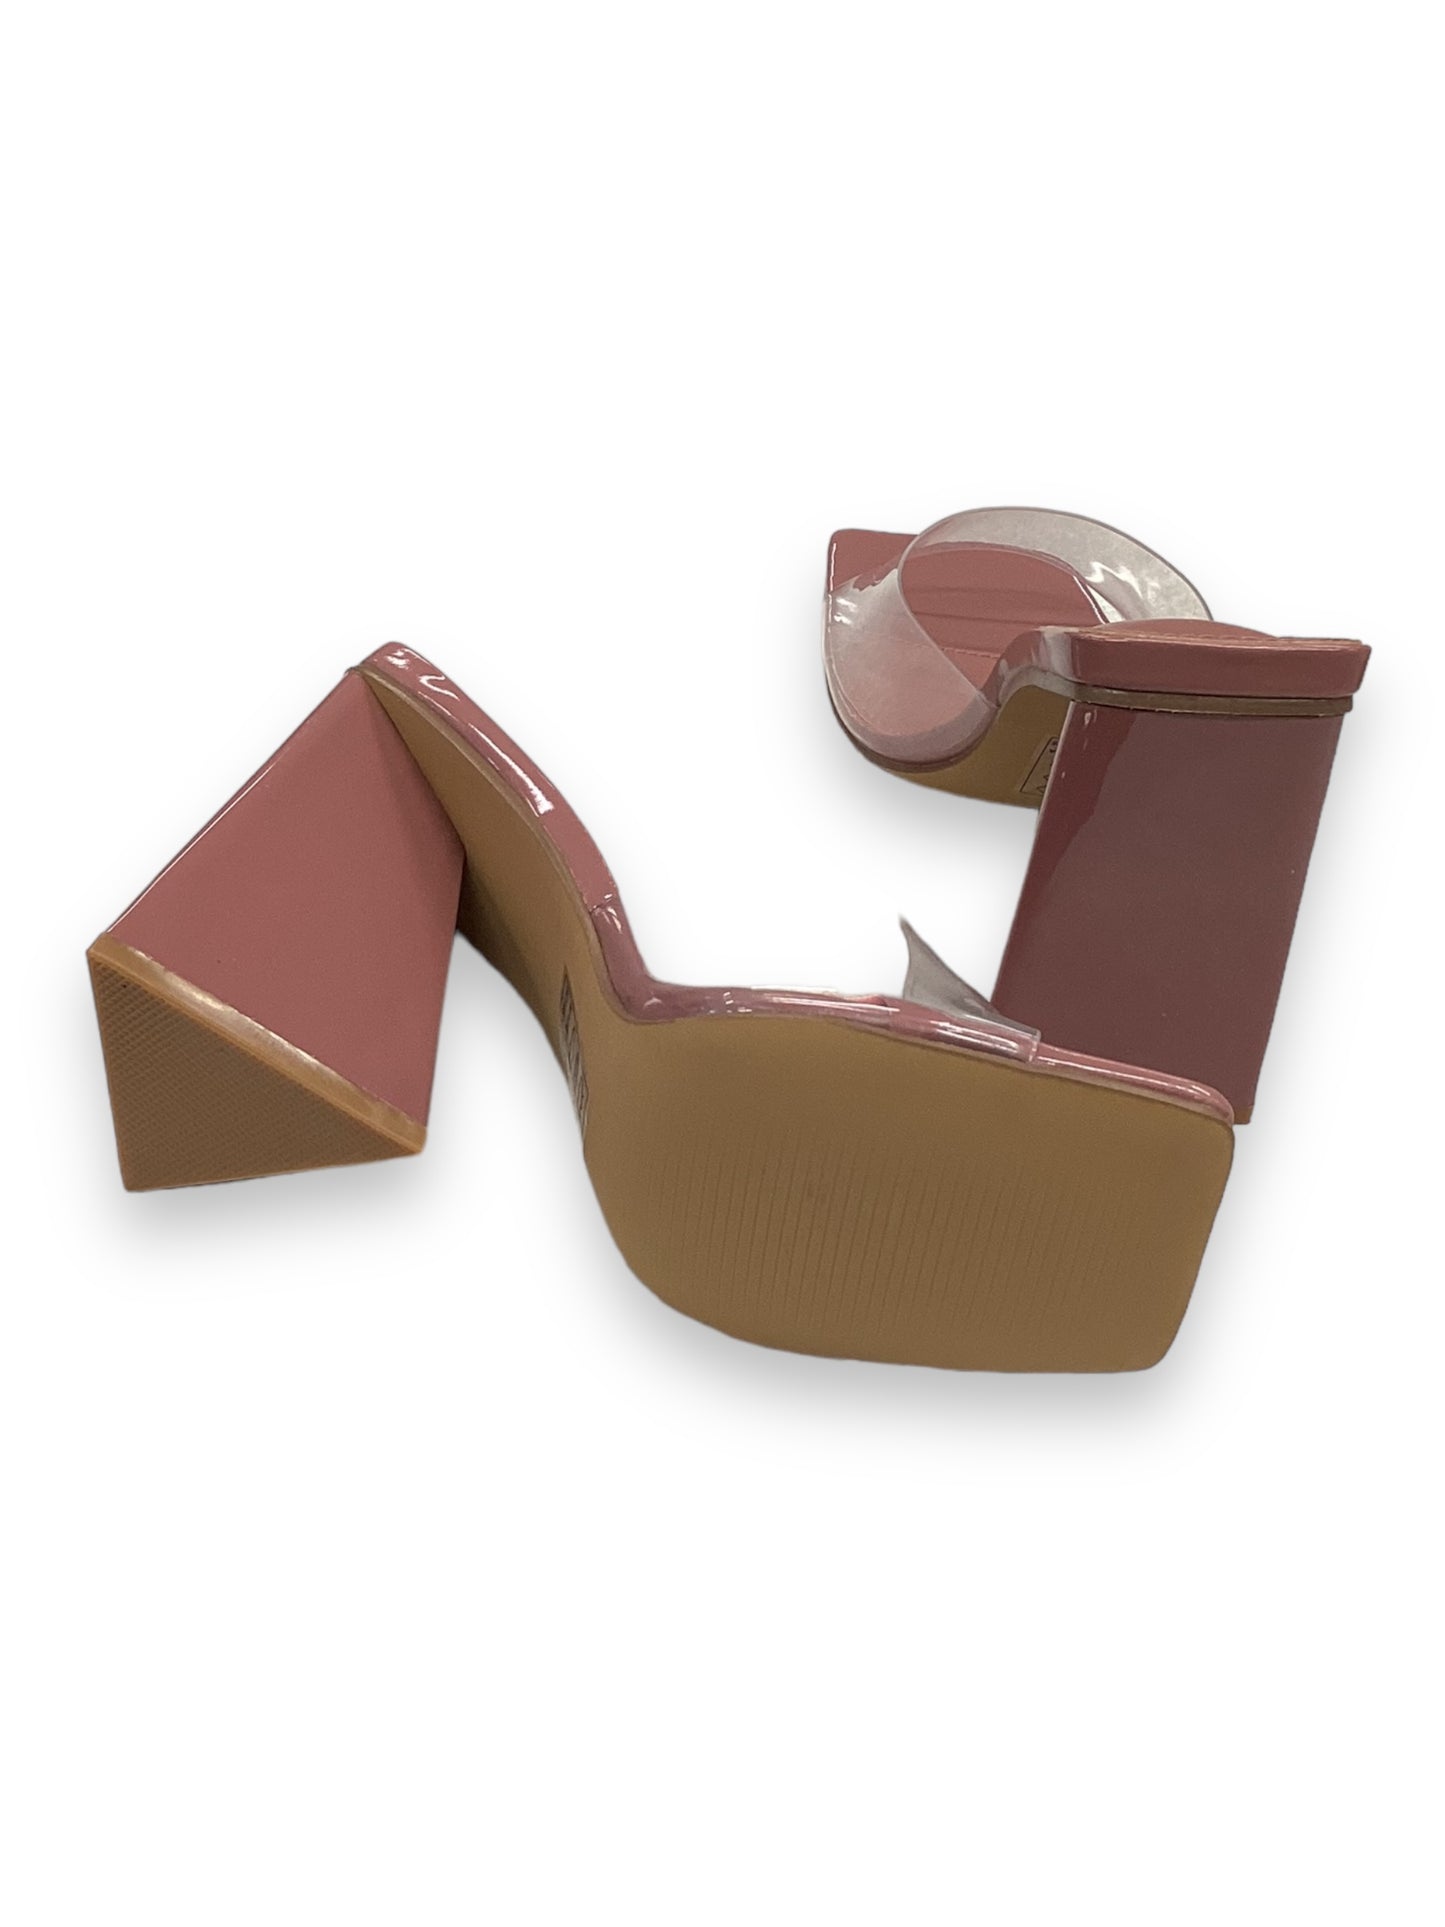 Sandals Heels Block By Qupid  Size: 6